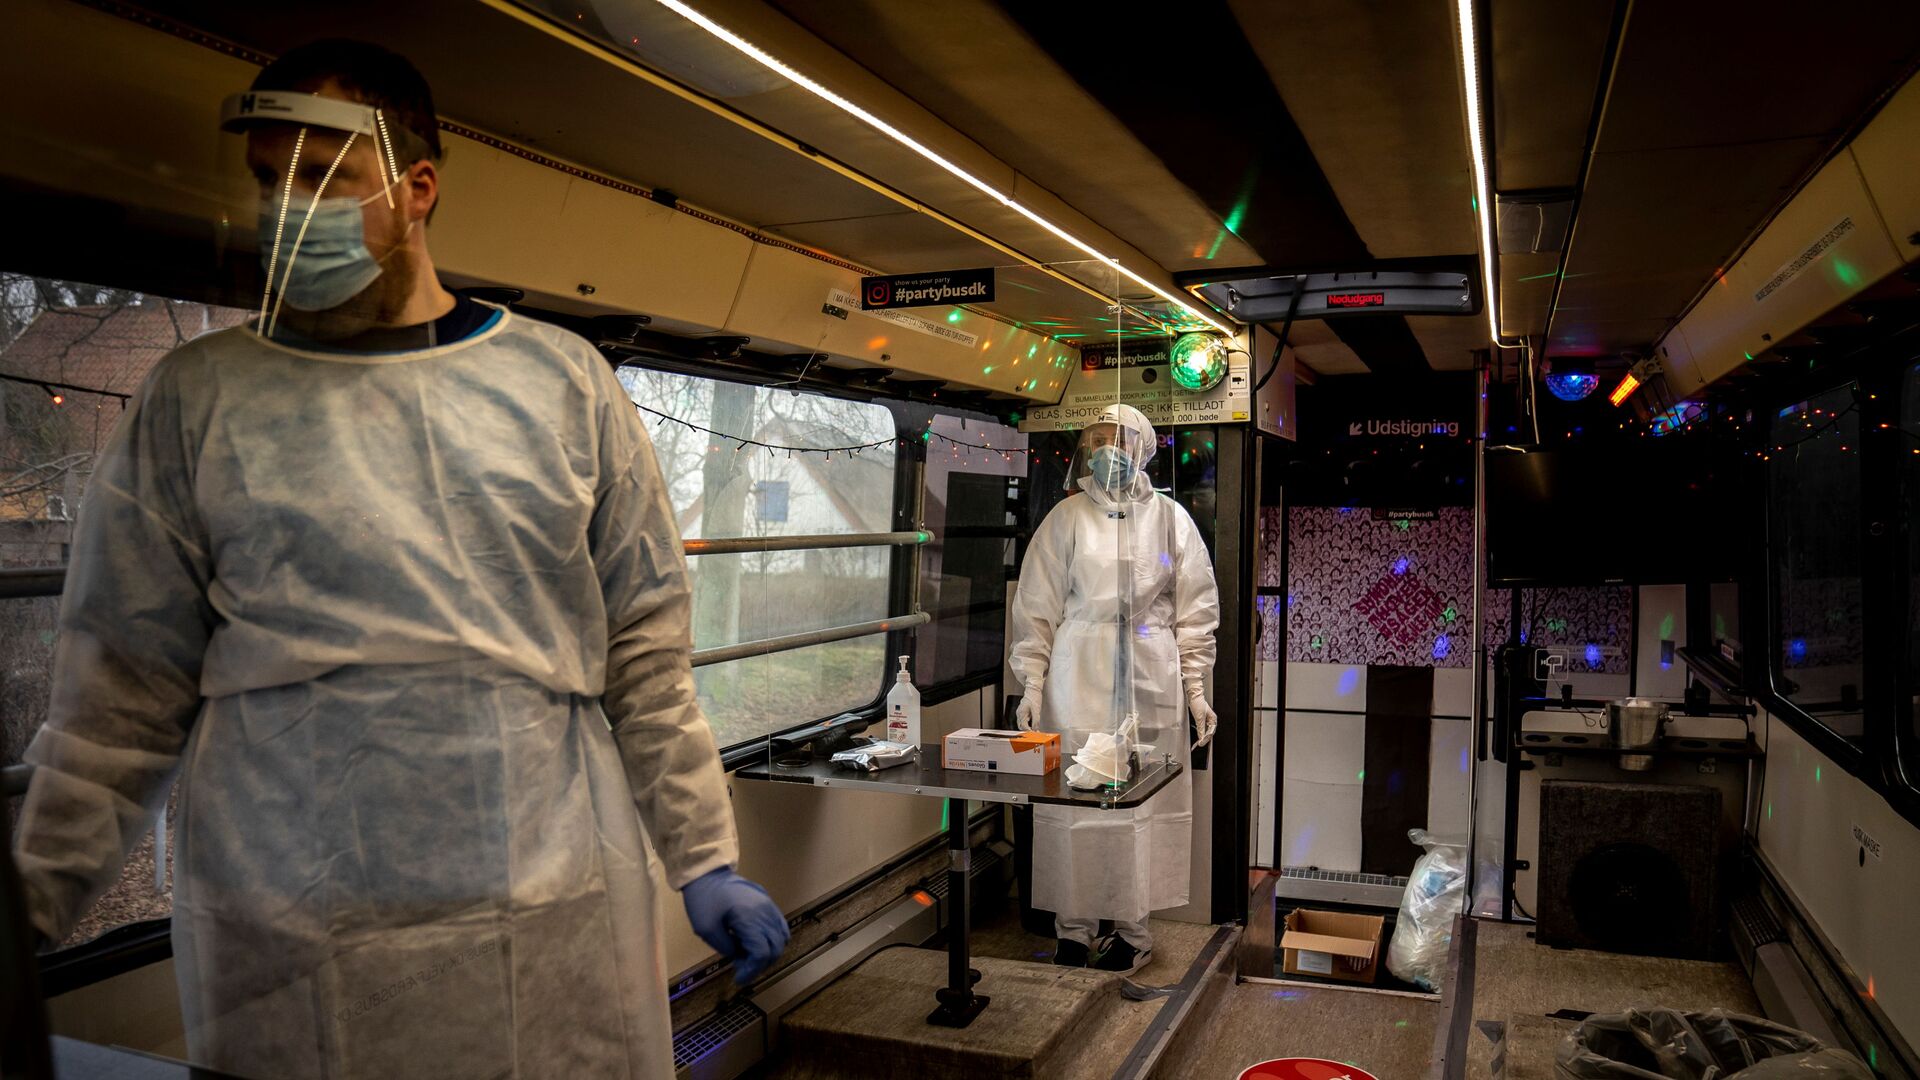 Healthcare workers wait in the Partybus, where people can listen to music while being tested for the coronavirus disease (COVID-19), in Ishoej, Denmark February 23, 2021 - Sputnik International, 1920, 21.05.2021